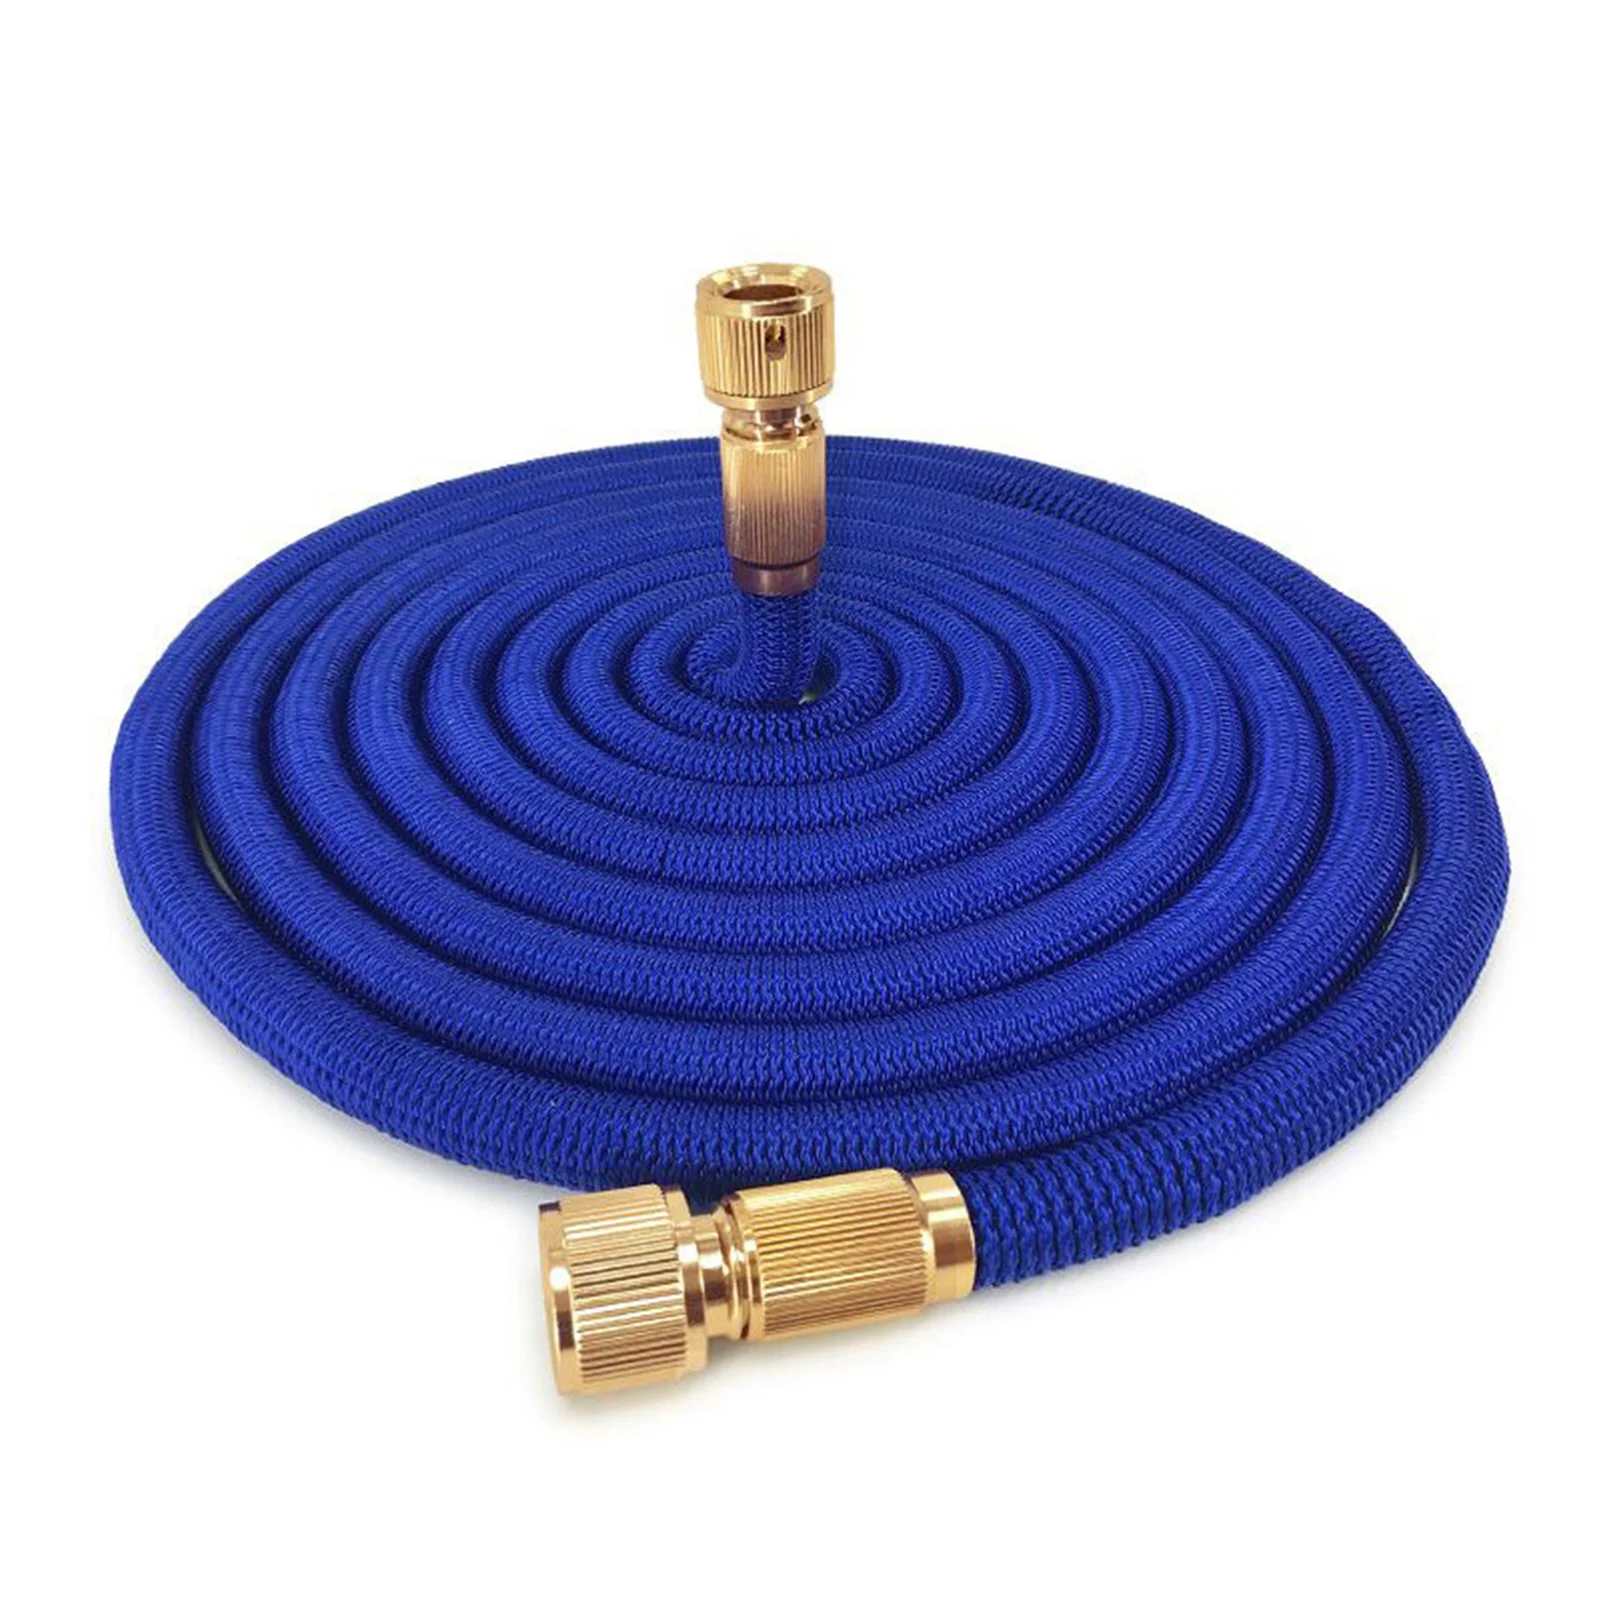 

Expandable Garden Hose Strength Durable Lightweight Leakproof Water Hose For Outdoor